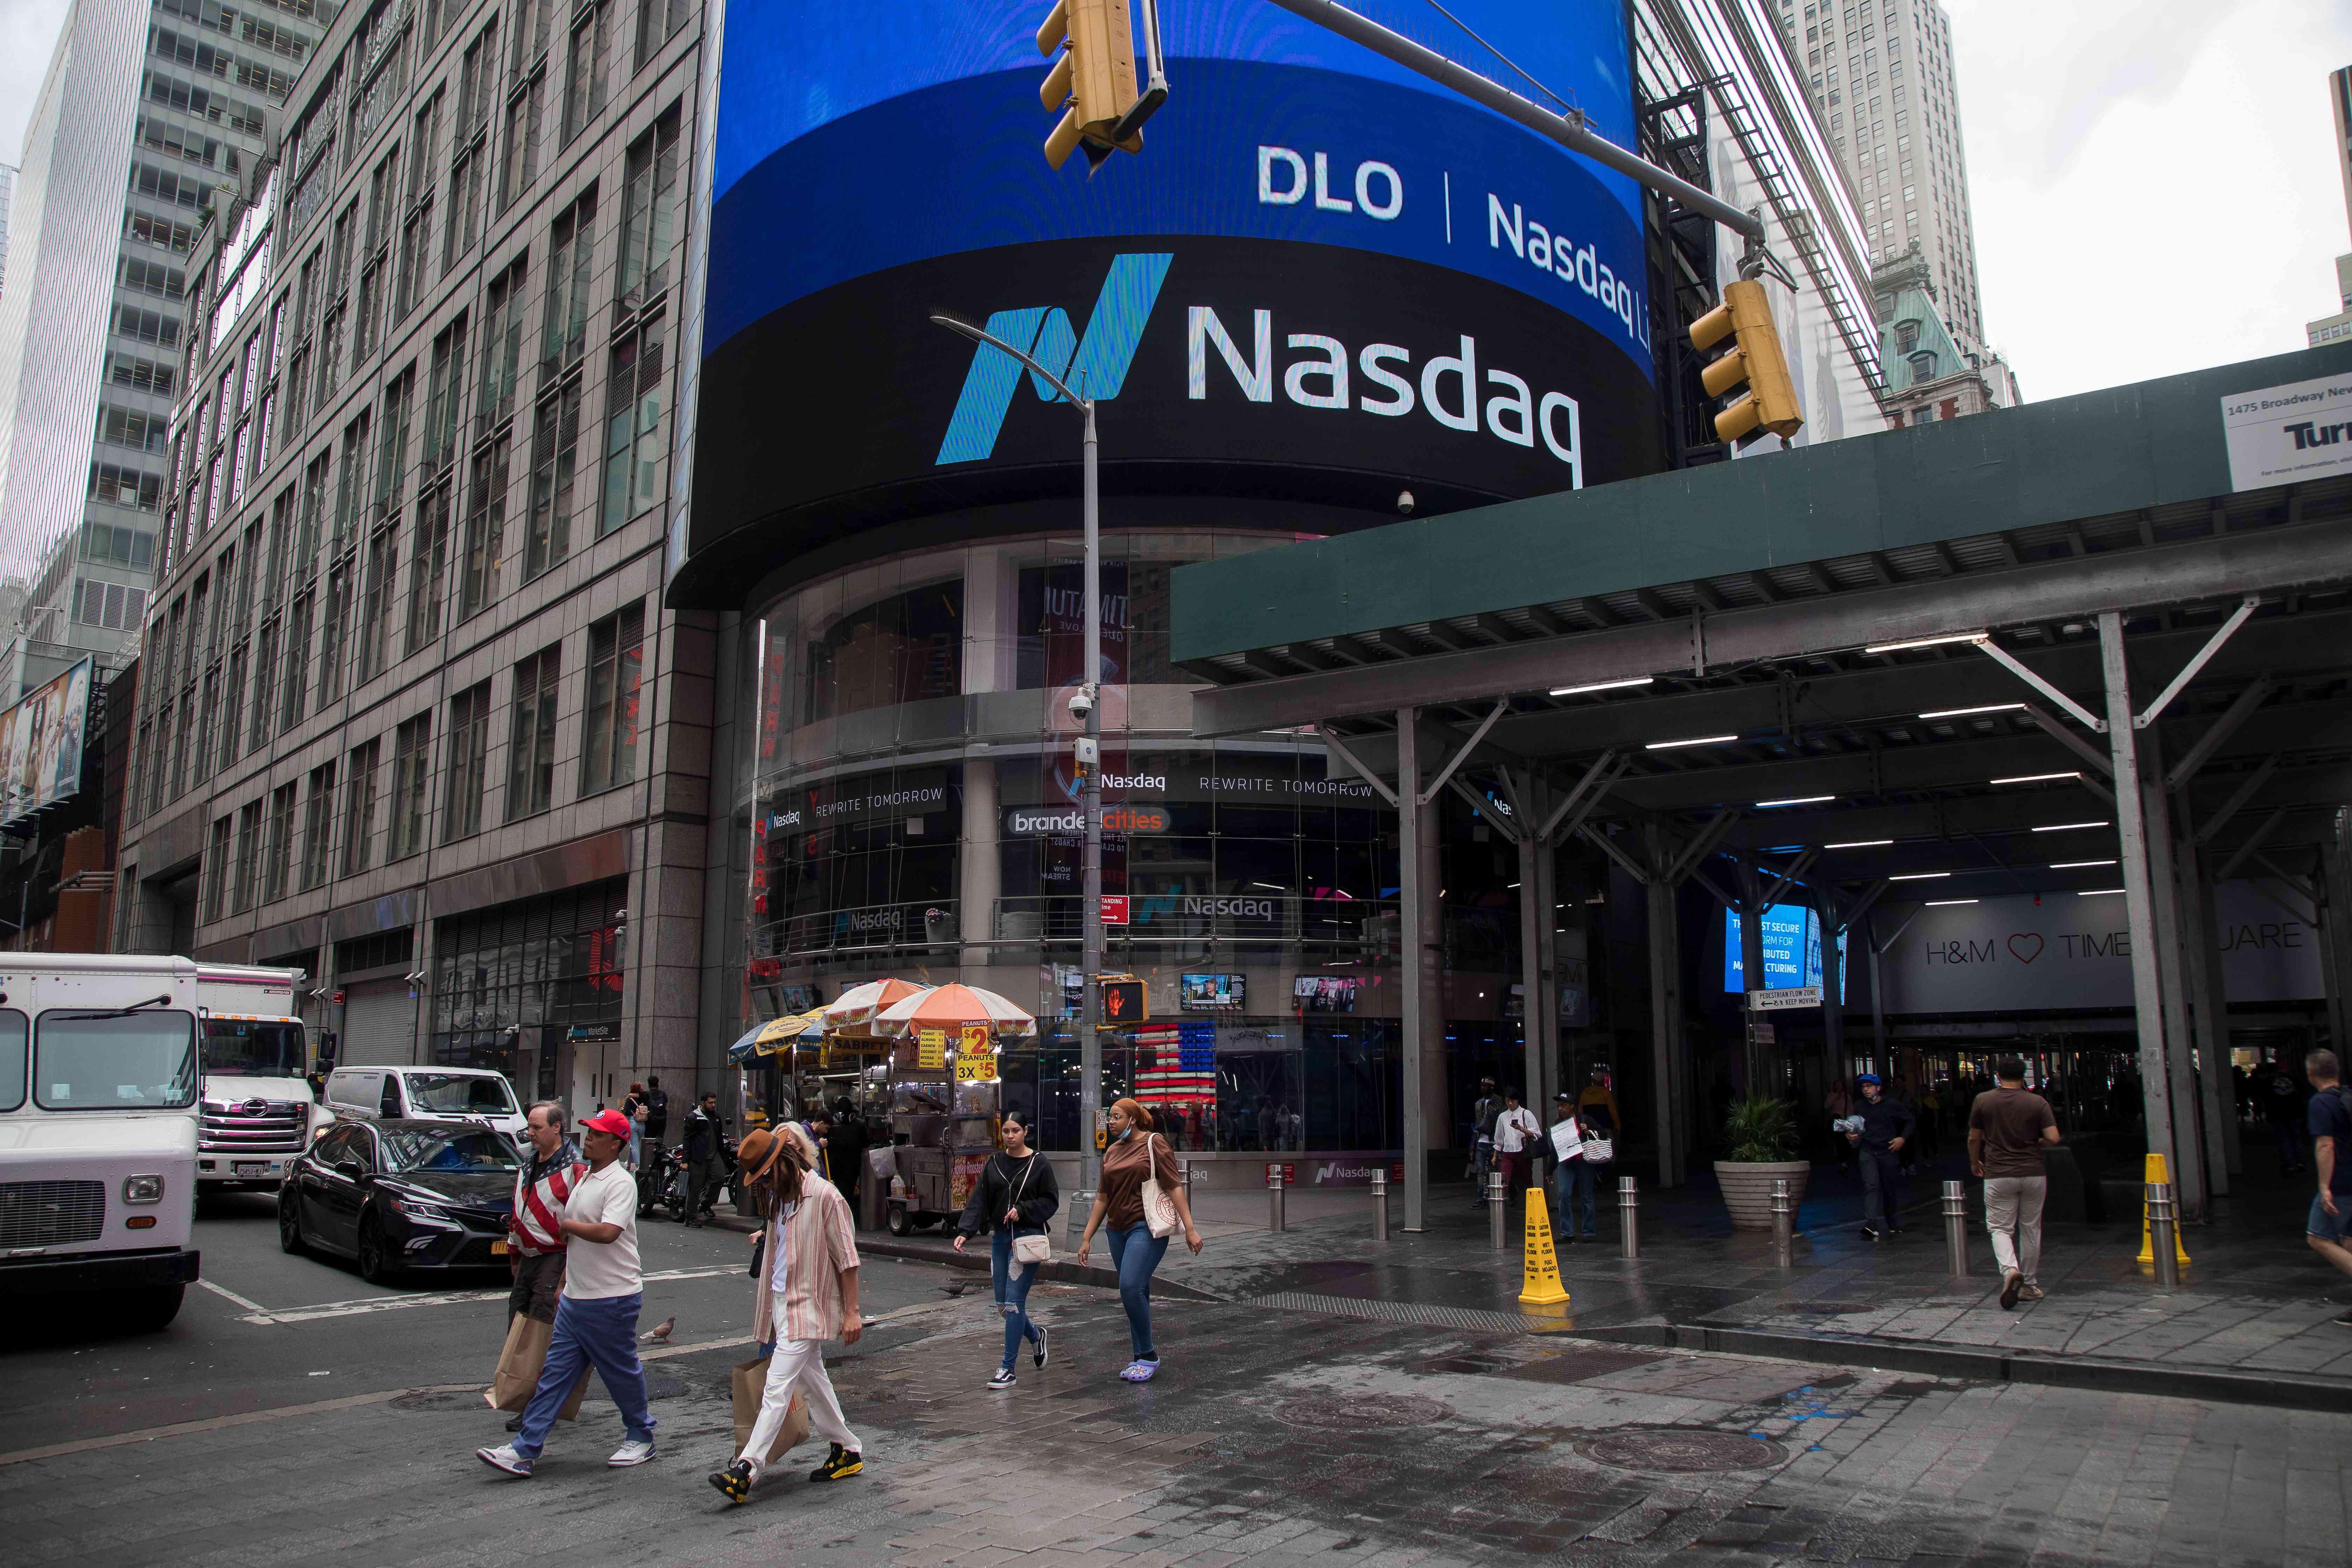 Street view of the Nasdaq building in New York